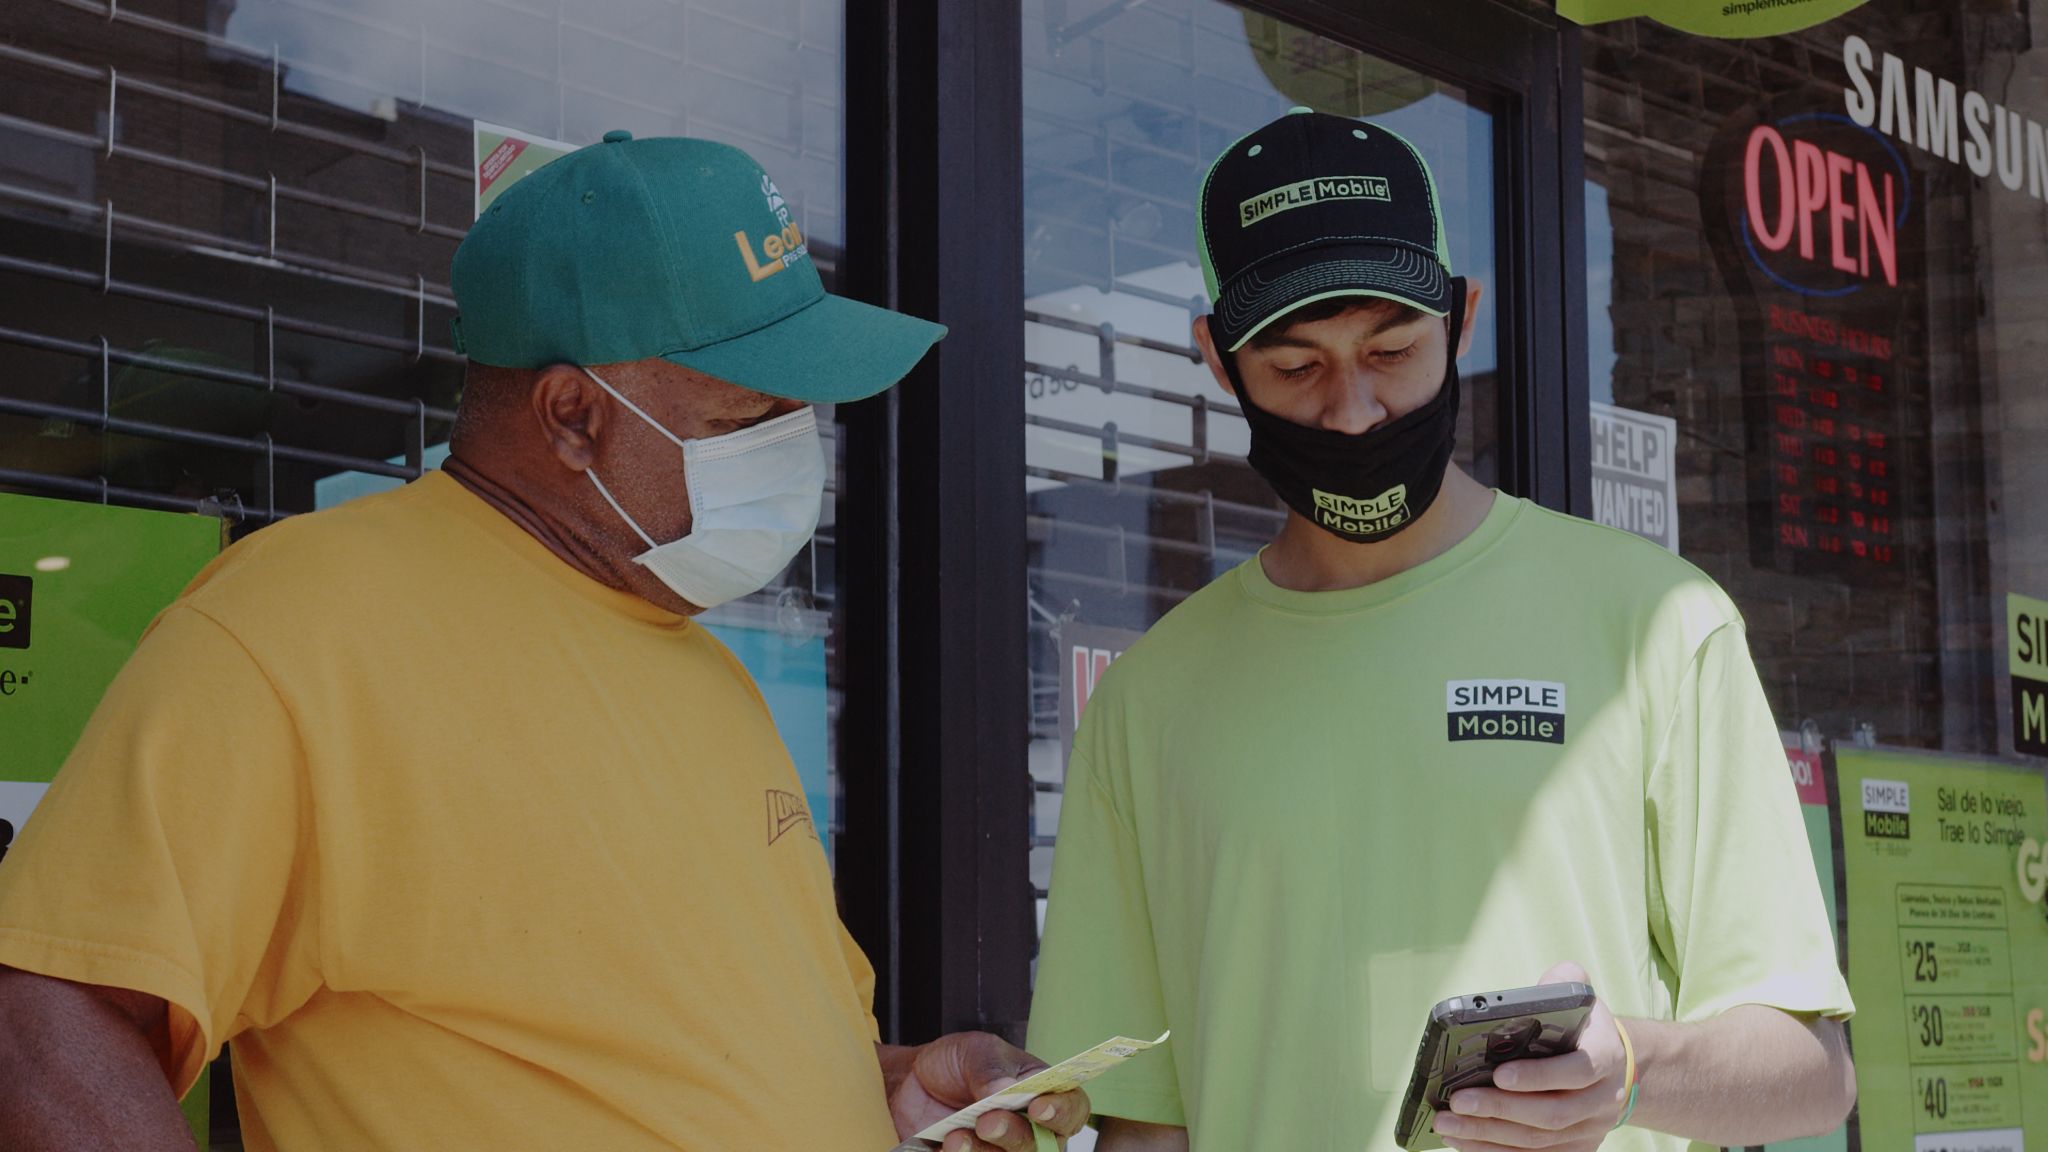 Male Simple Mobile employee wearing black mask and cap showing something on a call phone to a customer wearing a yellow shirt, surgical mask and cap